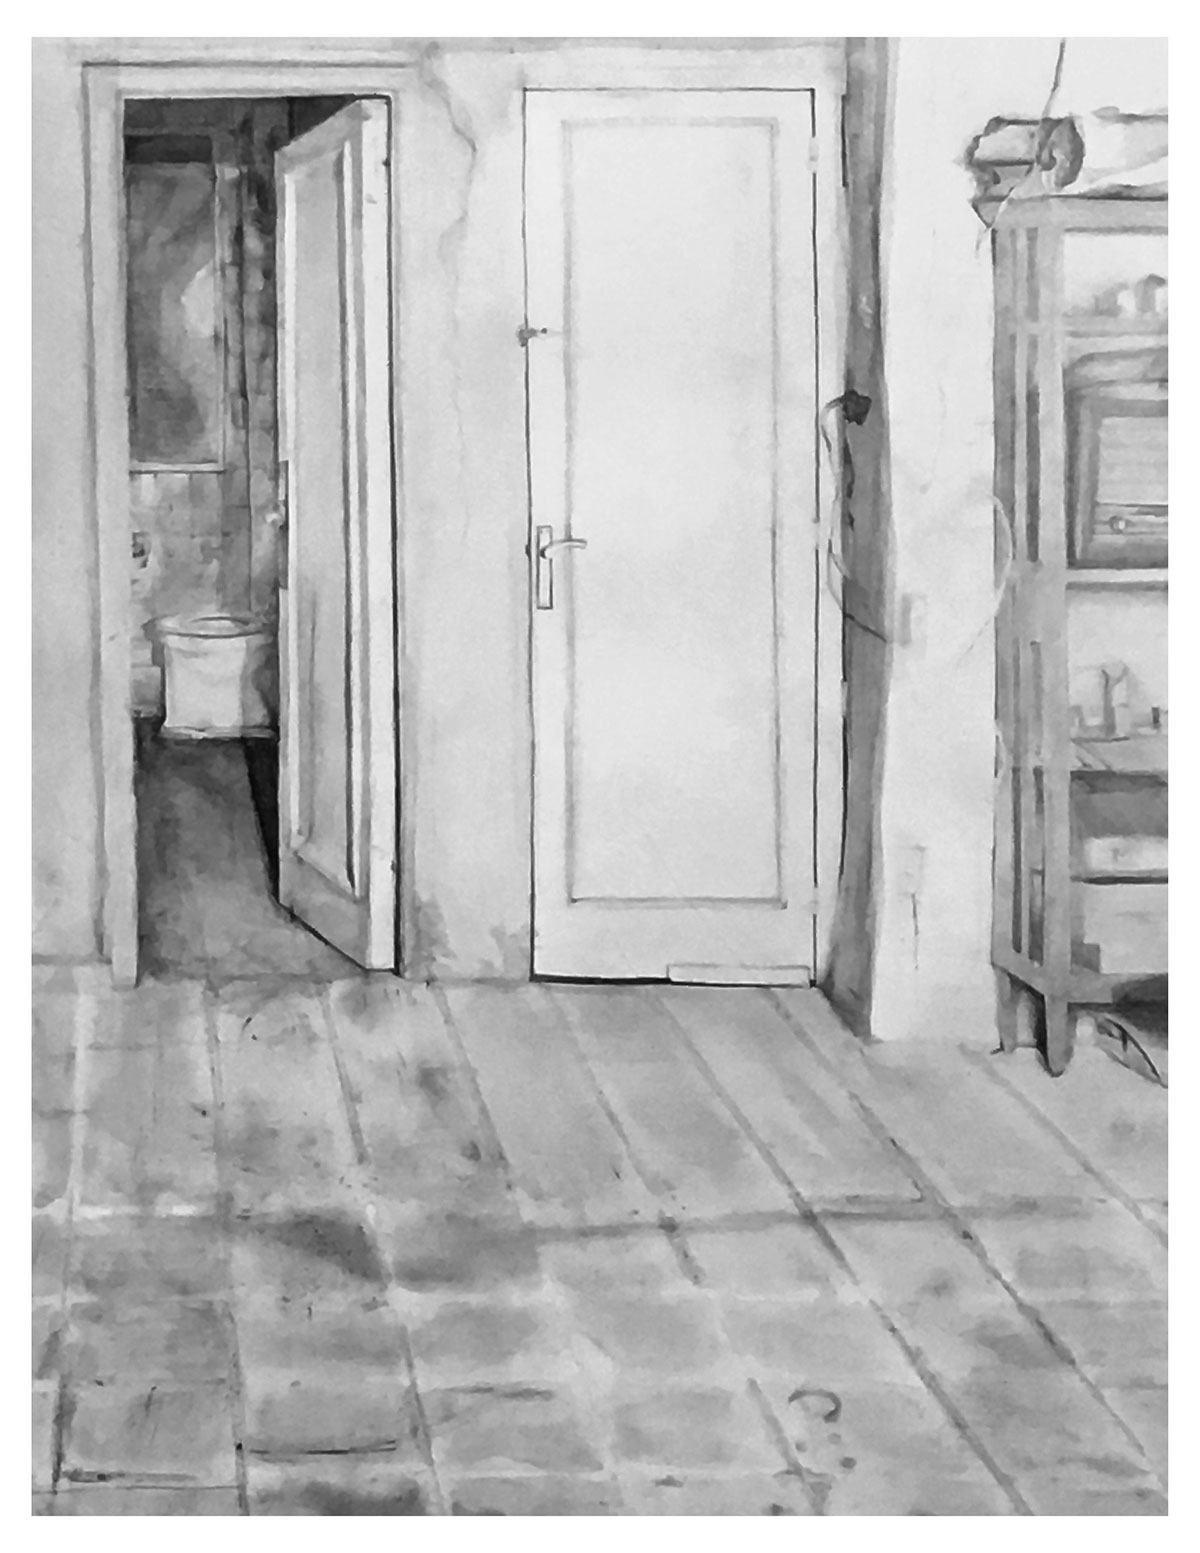 interior drawings graphite charcoal wash